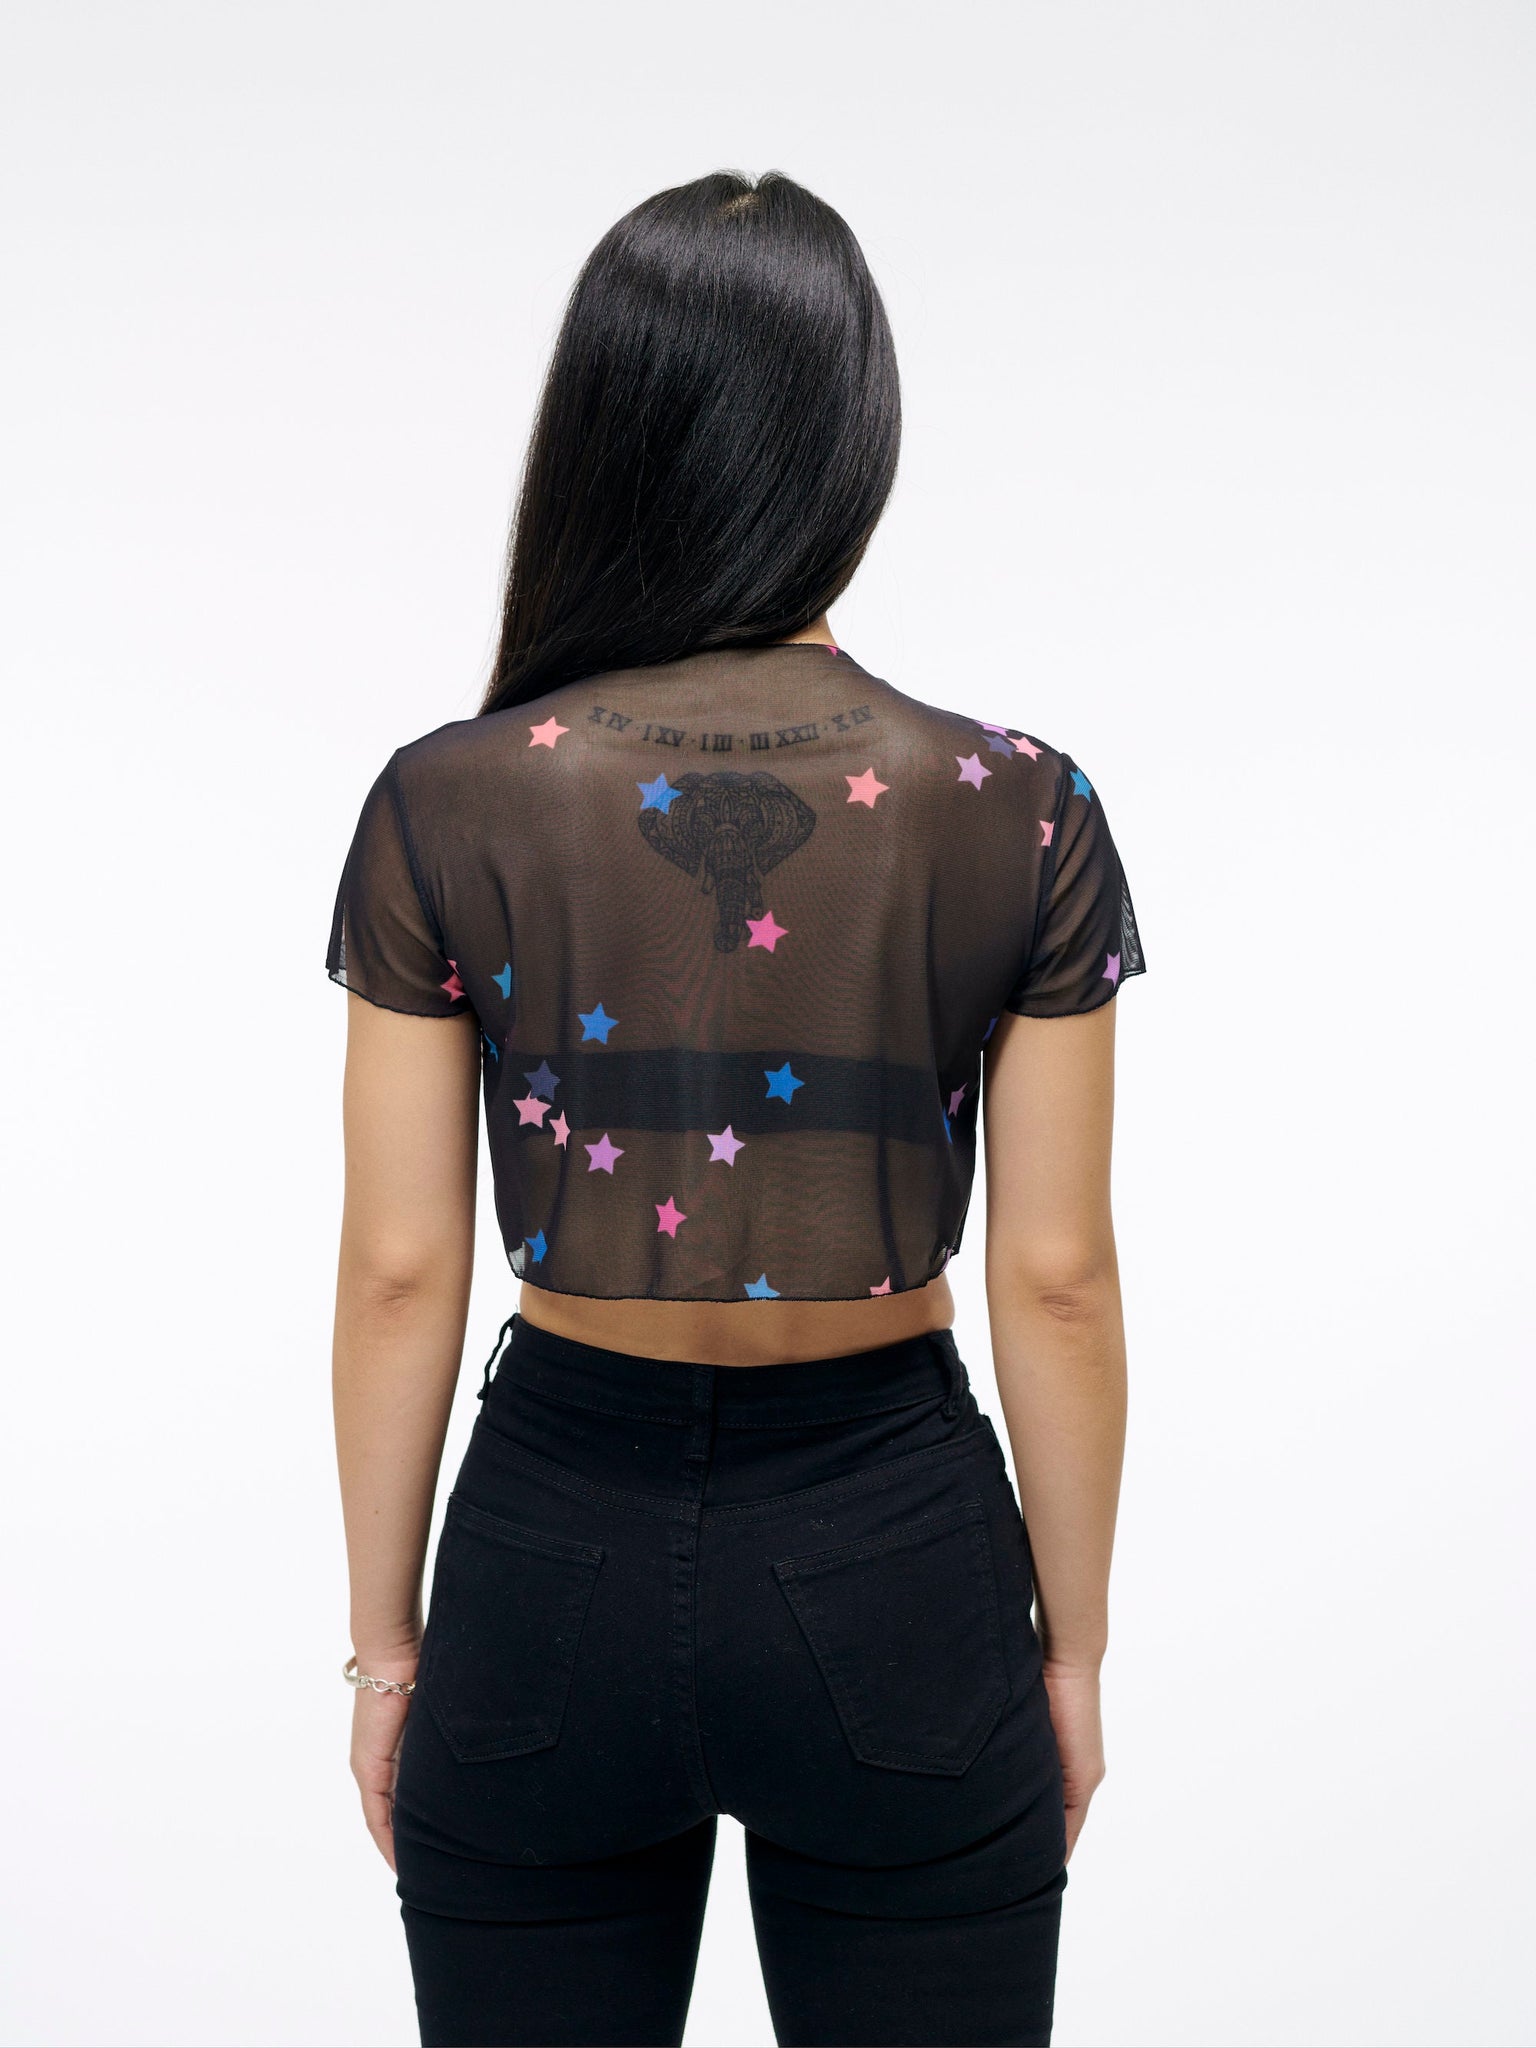 The Star Confetti Crop Top | Sheer Mesh Shirt in Black with Pink and Purple Stars | Goose Taffy